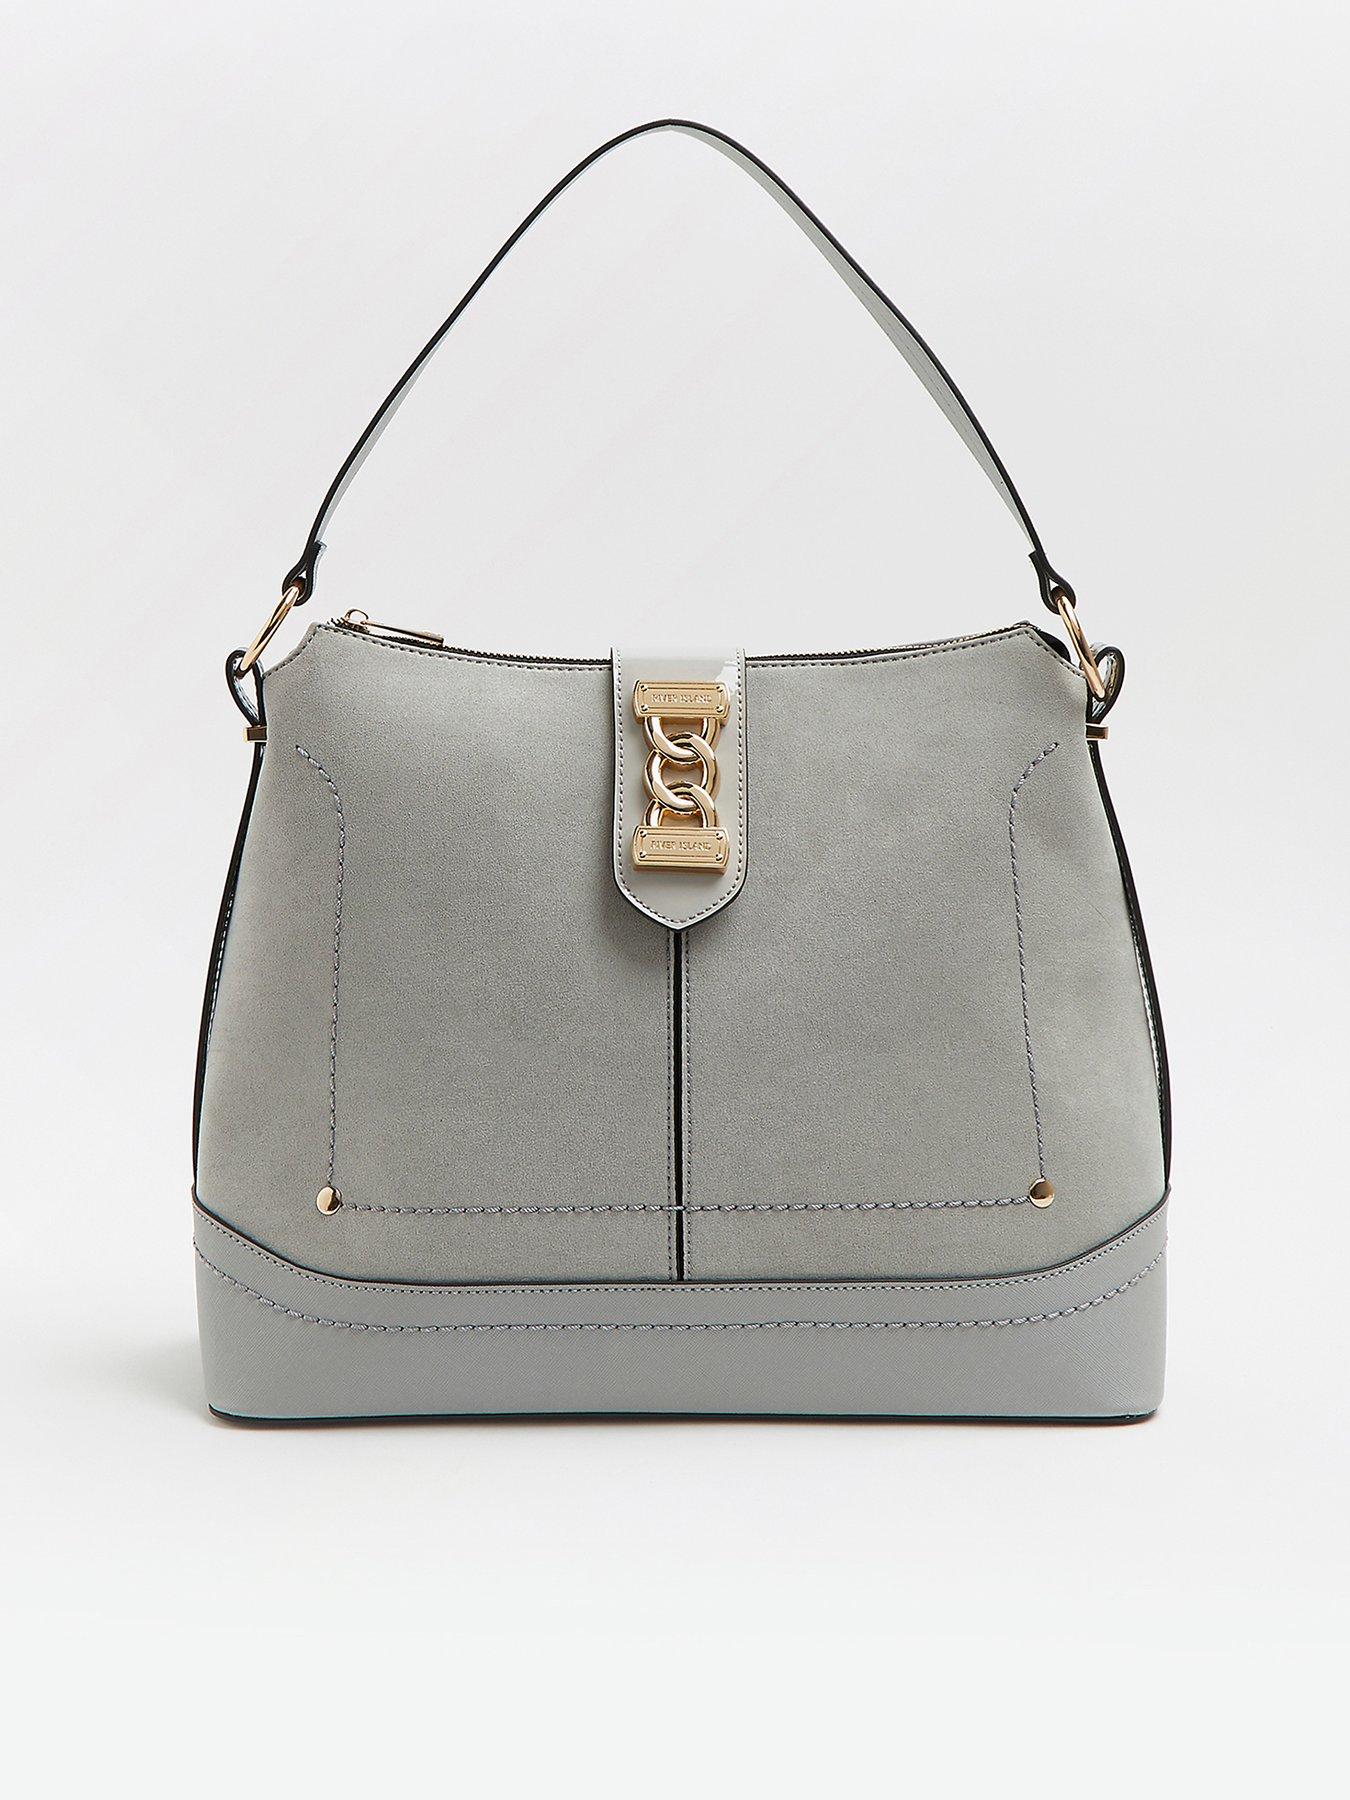 Habitual conductor Clip mariposa River Island Chain Front Slouch Bag - Grey | littlewoods.com